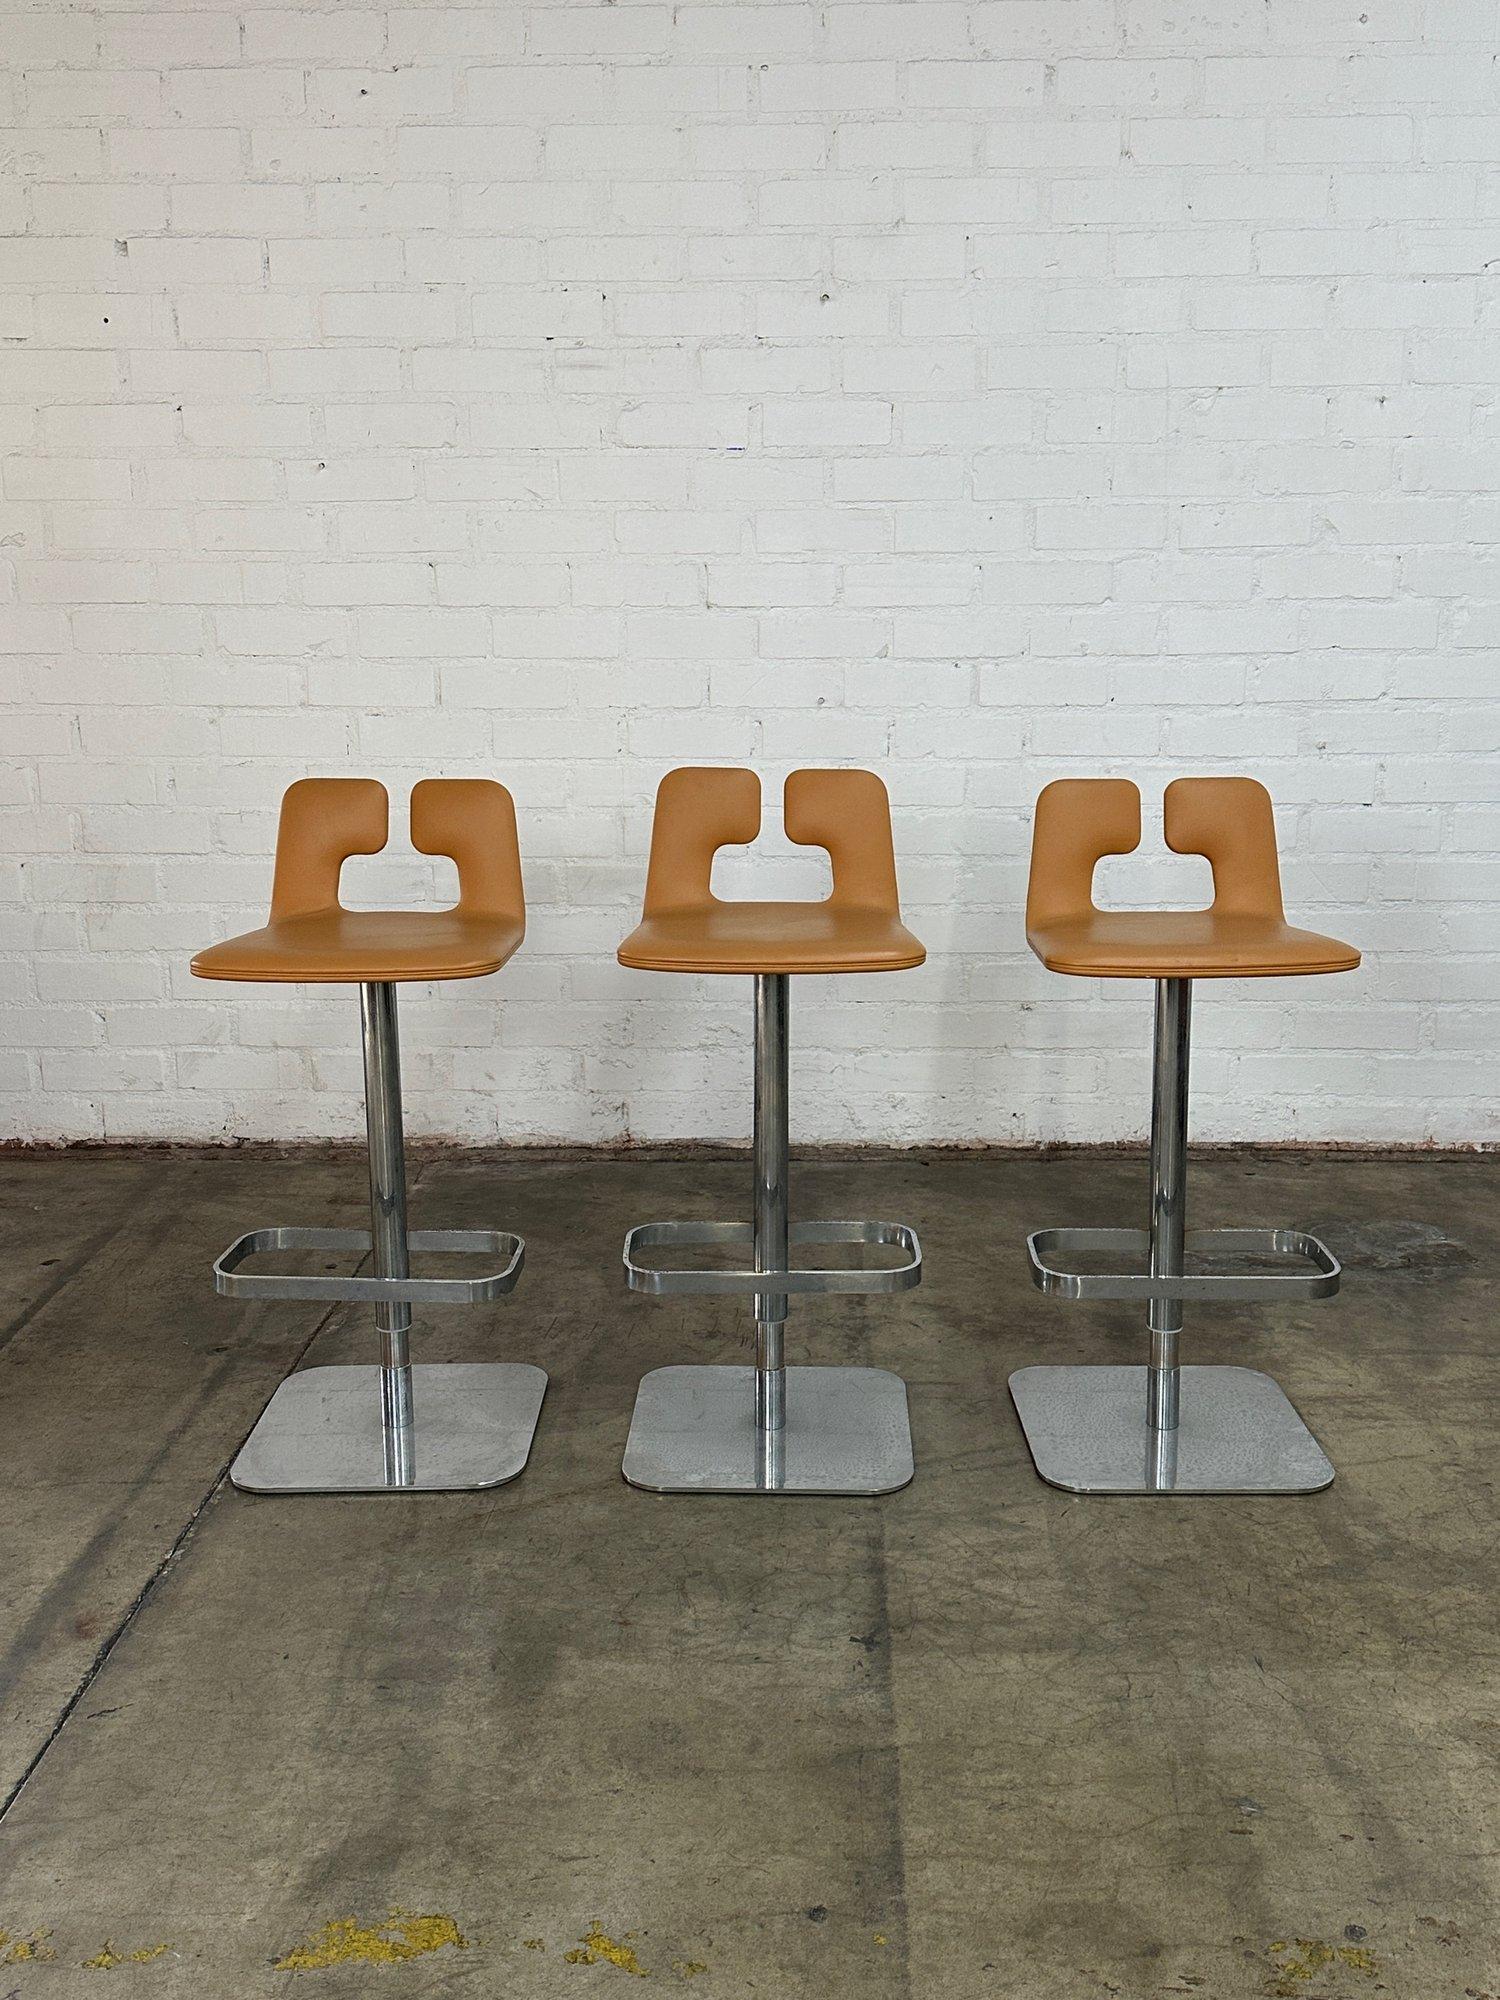 W16 D16 H37 SW16 SD15 SH30

Leather Stools with a bar seat height in great gently used condition. Stools are all structurally sound with no large visible. Chrome has very light patina. Price is for the set of three. Pick these up at a fraction of